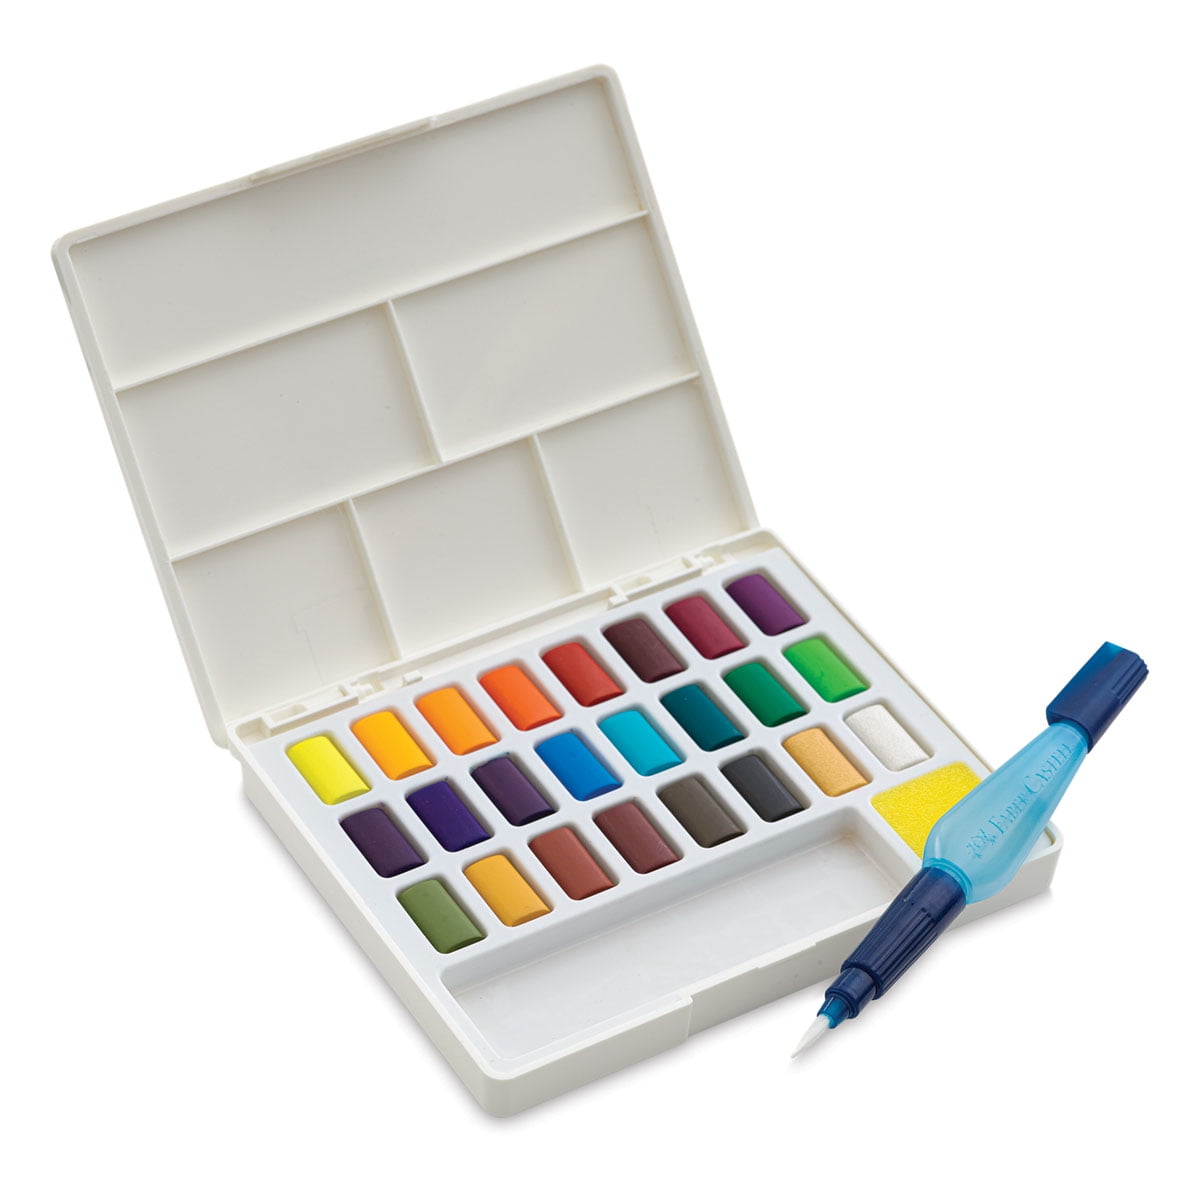 Faber Castell Creative Studio Half Pan Watercolor Sets - Assorted Colors,  Set of 24